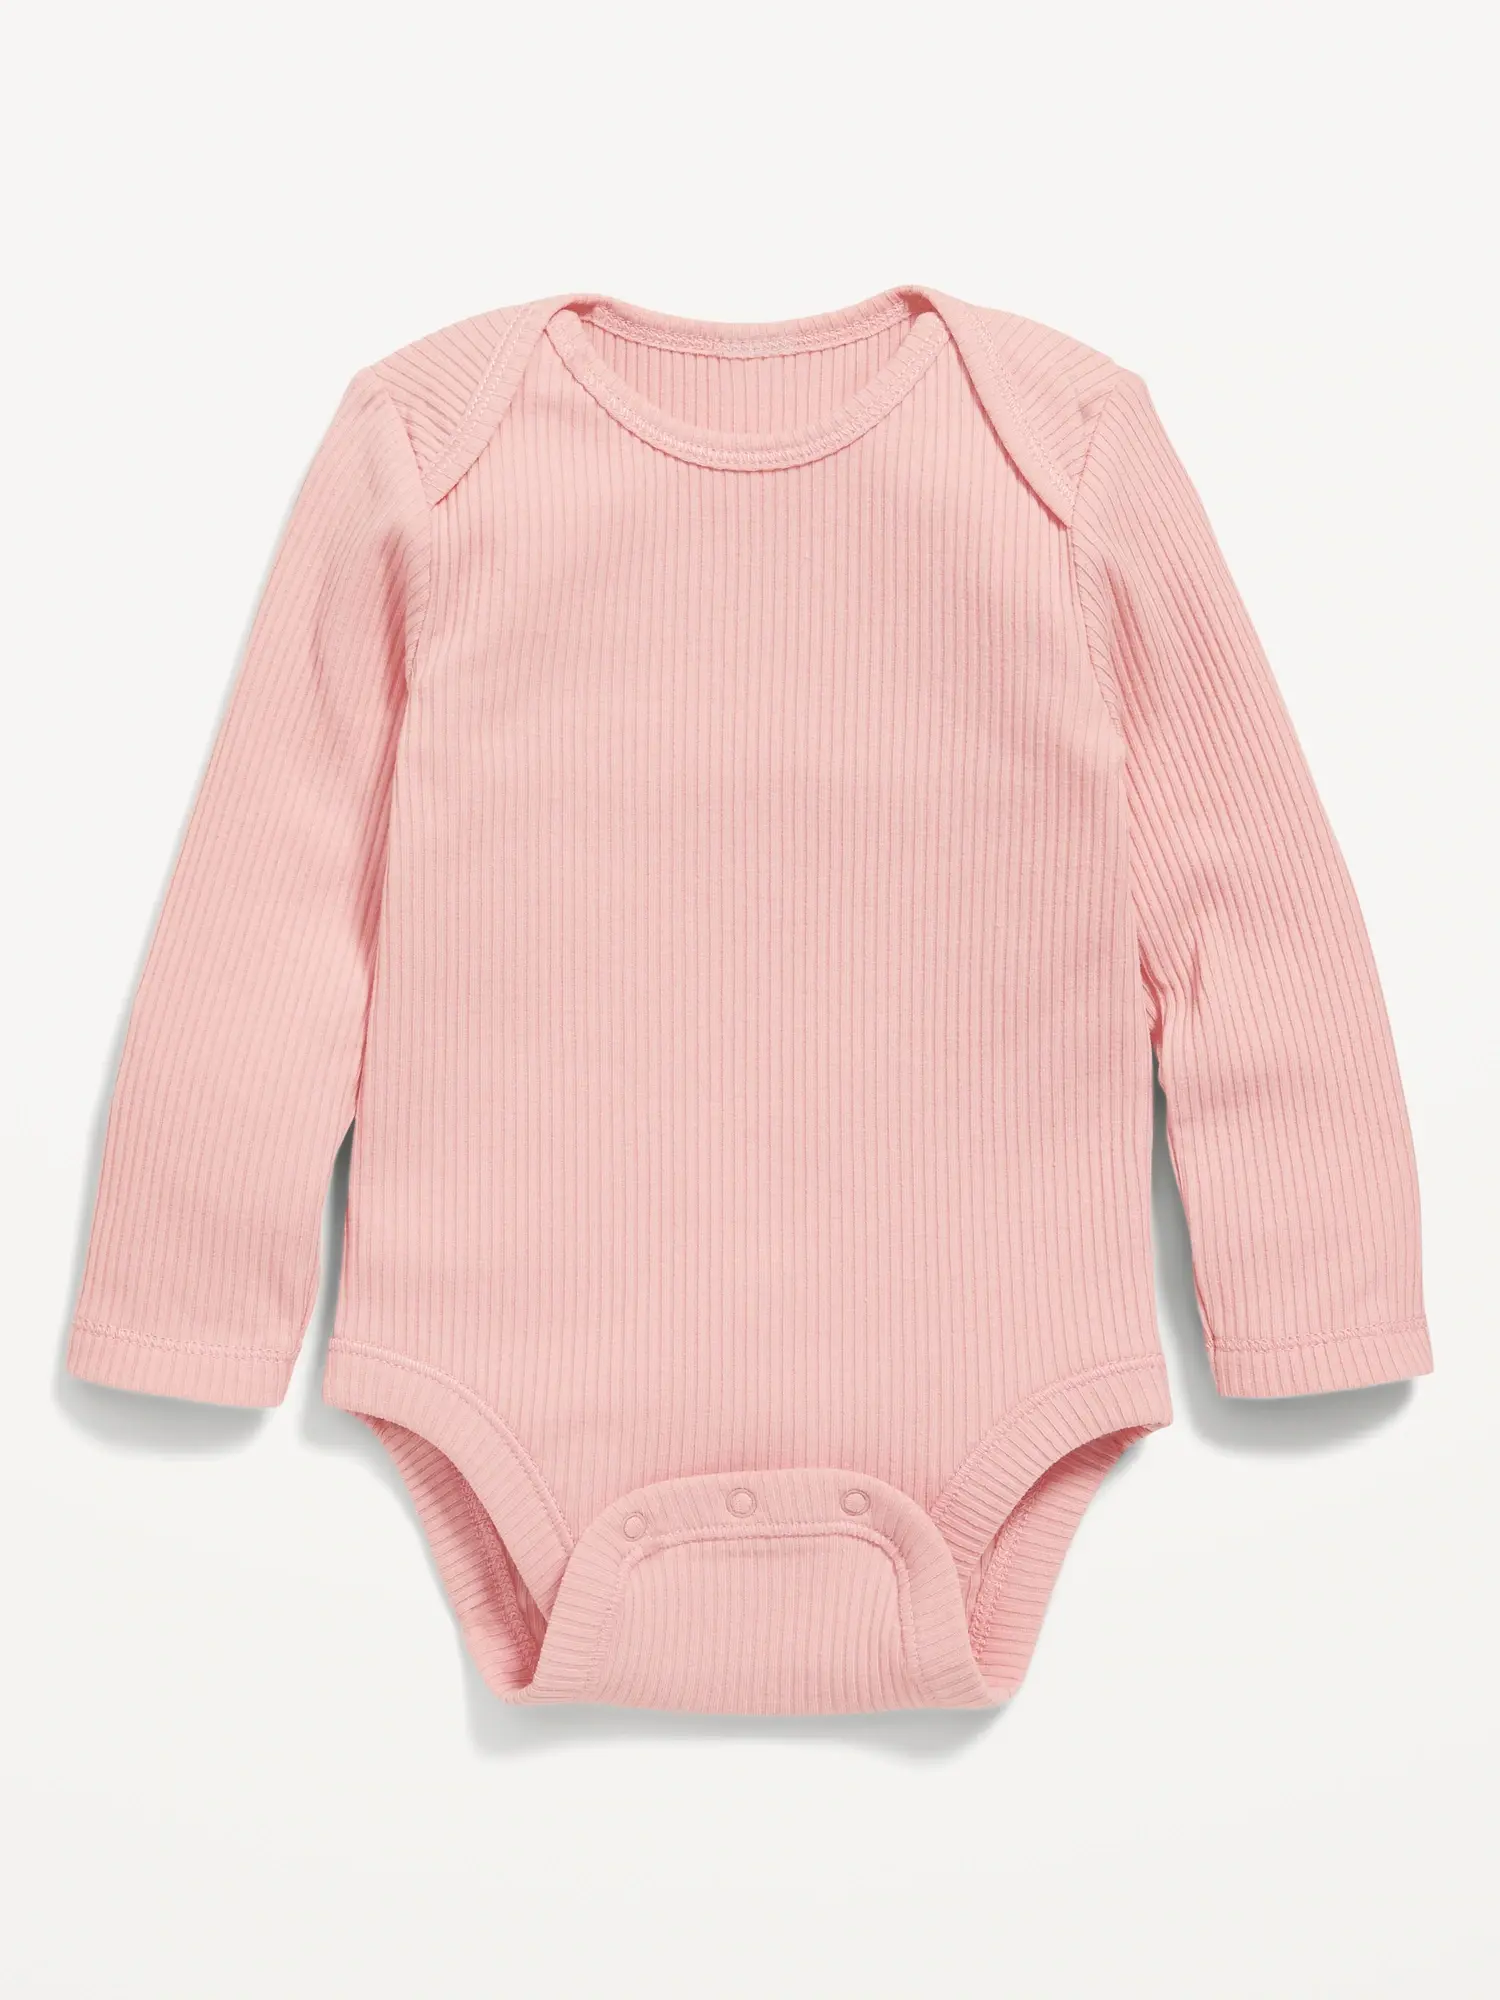 Old Navy Unisex Long-Sleeve Rib-Knit Bodysuit for Baby pink. 1